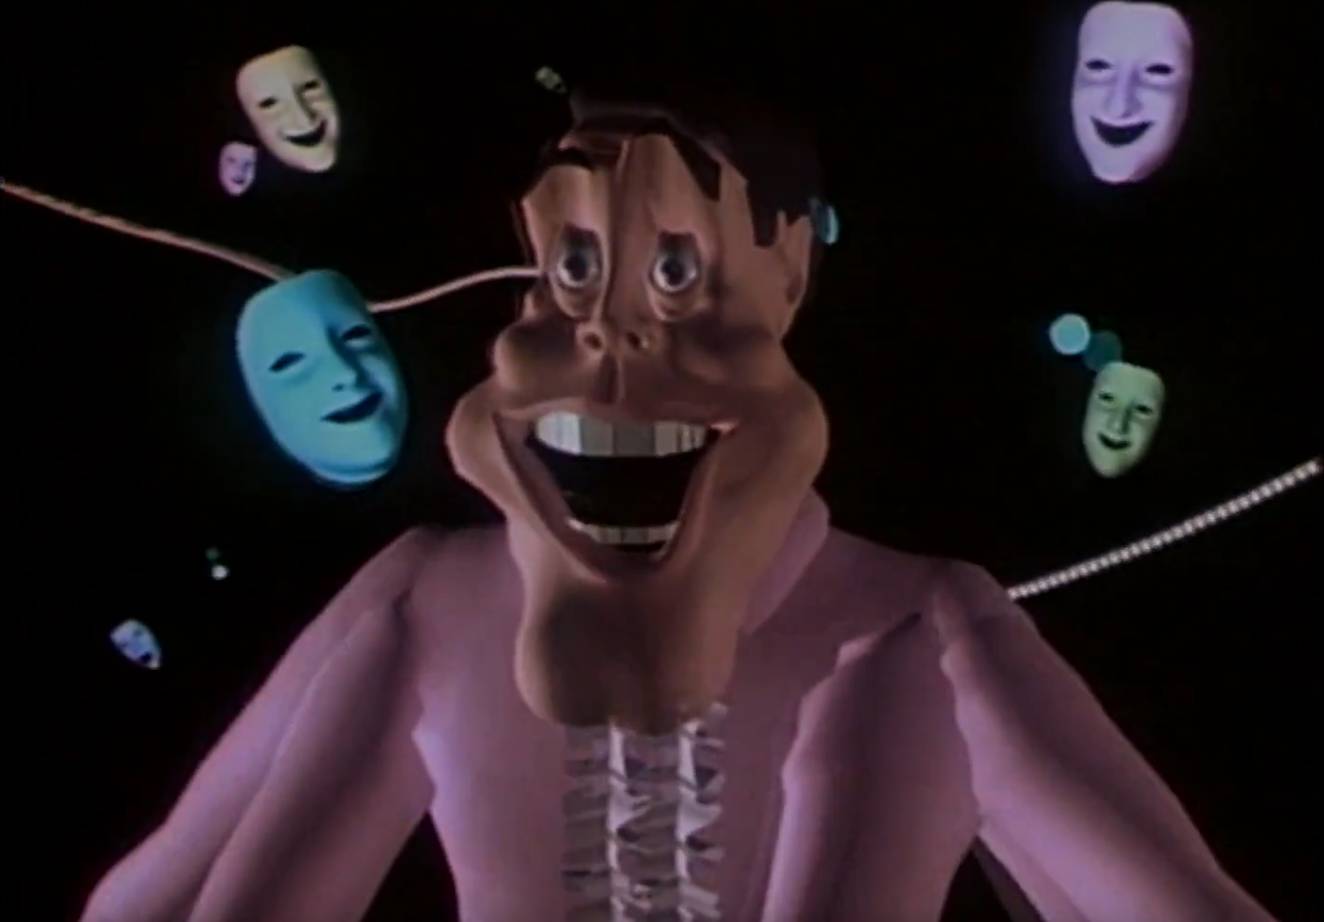 Tony de Peltrie, creepy-looking CGI animation of a piano player from 1985. Tony being driven to madness as floating theatrical face masks surround him.